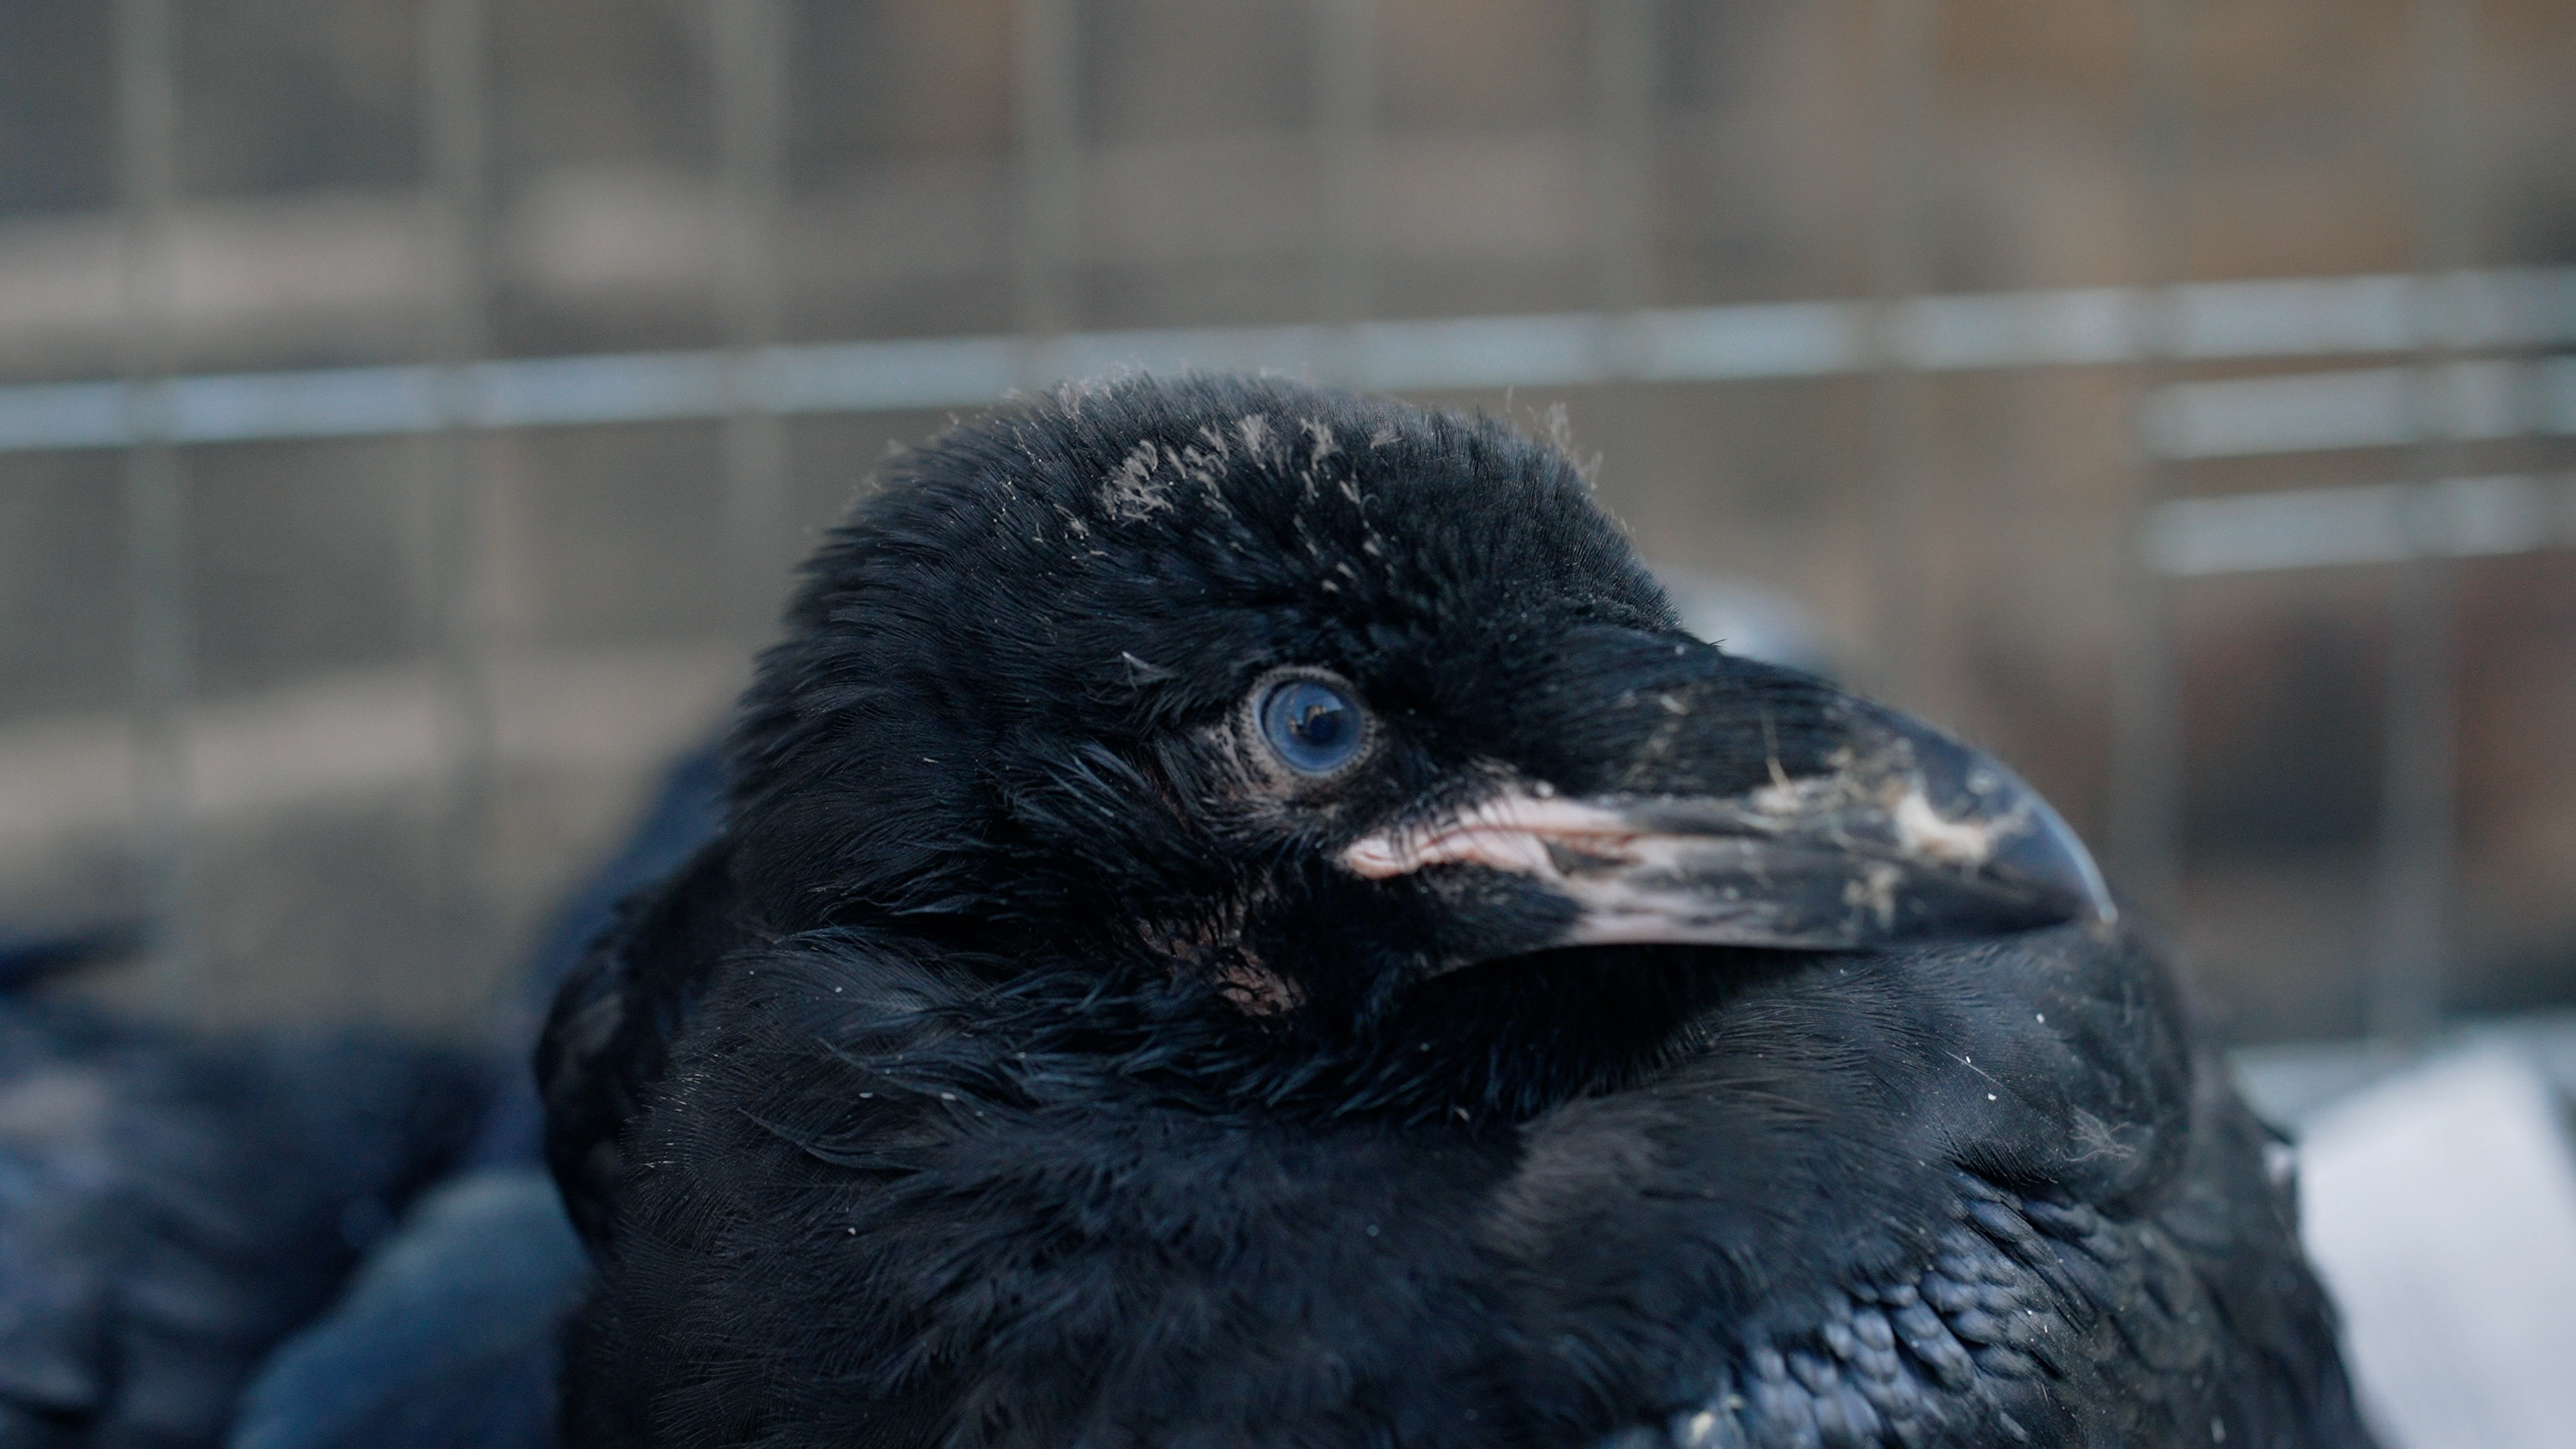 A baby raven at the Tower of London - the raven is looking to its left, with a black and pale beak and a blue eye. In the background are the bars of the cage